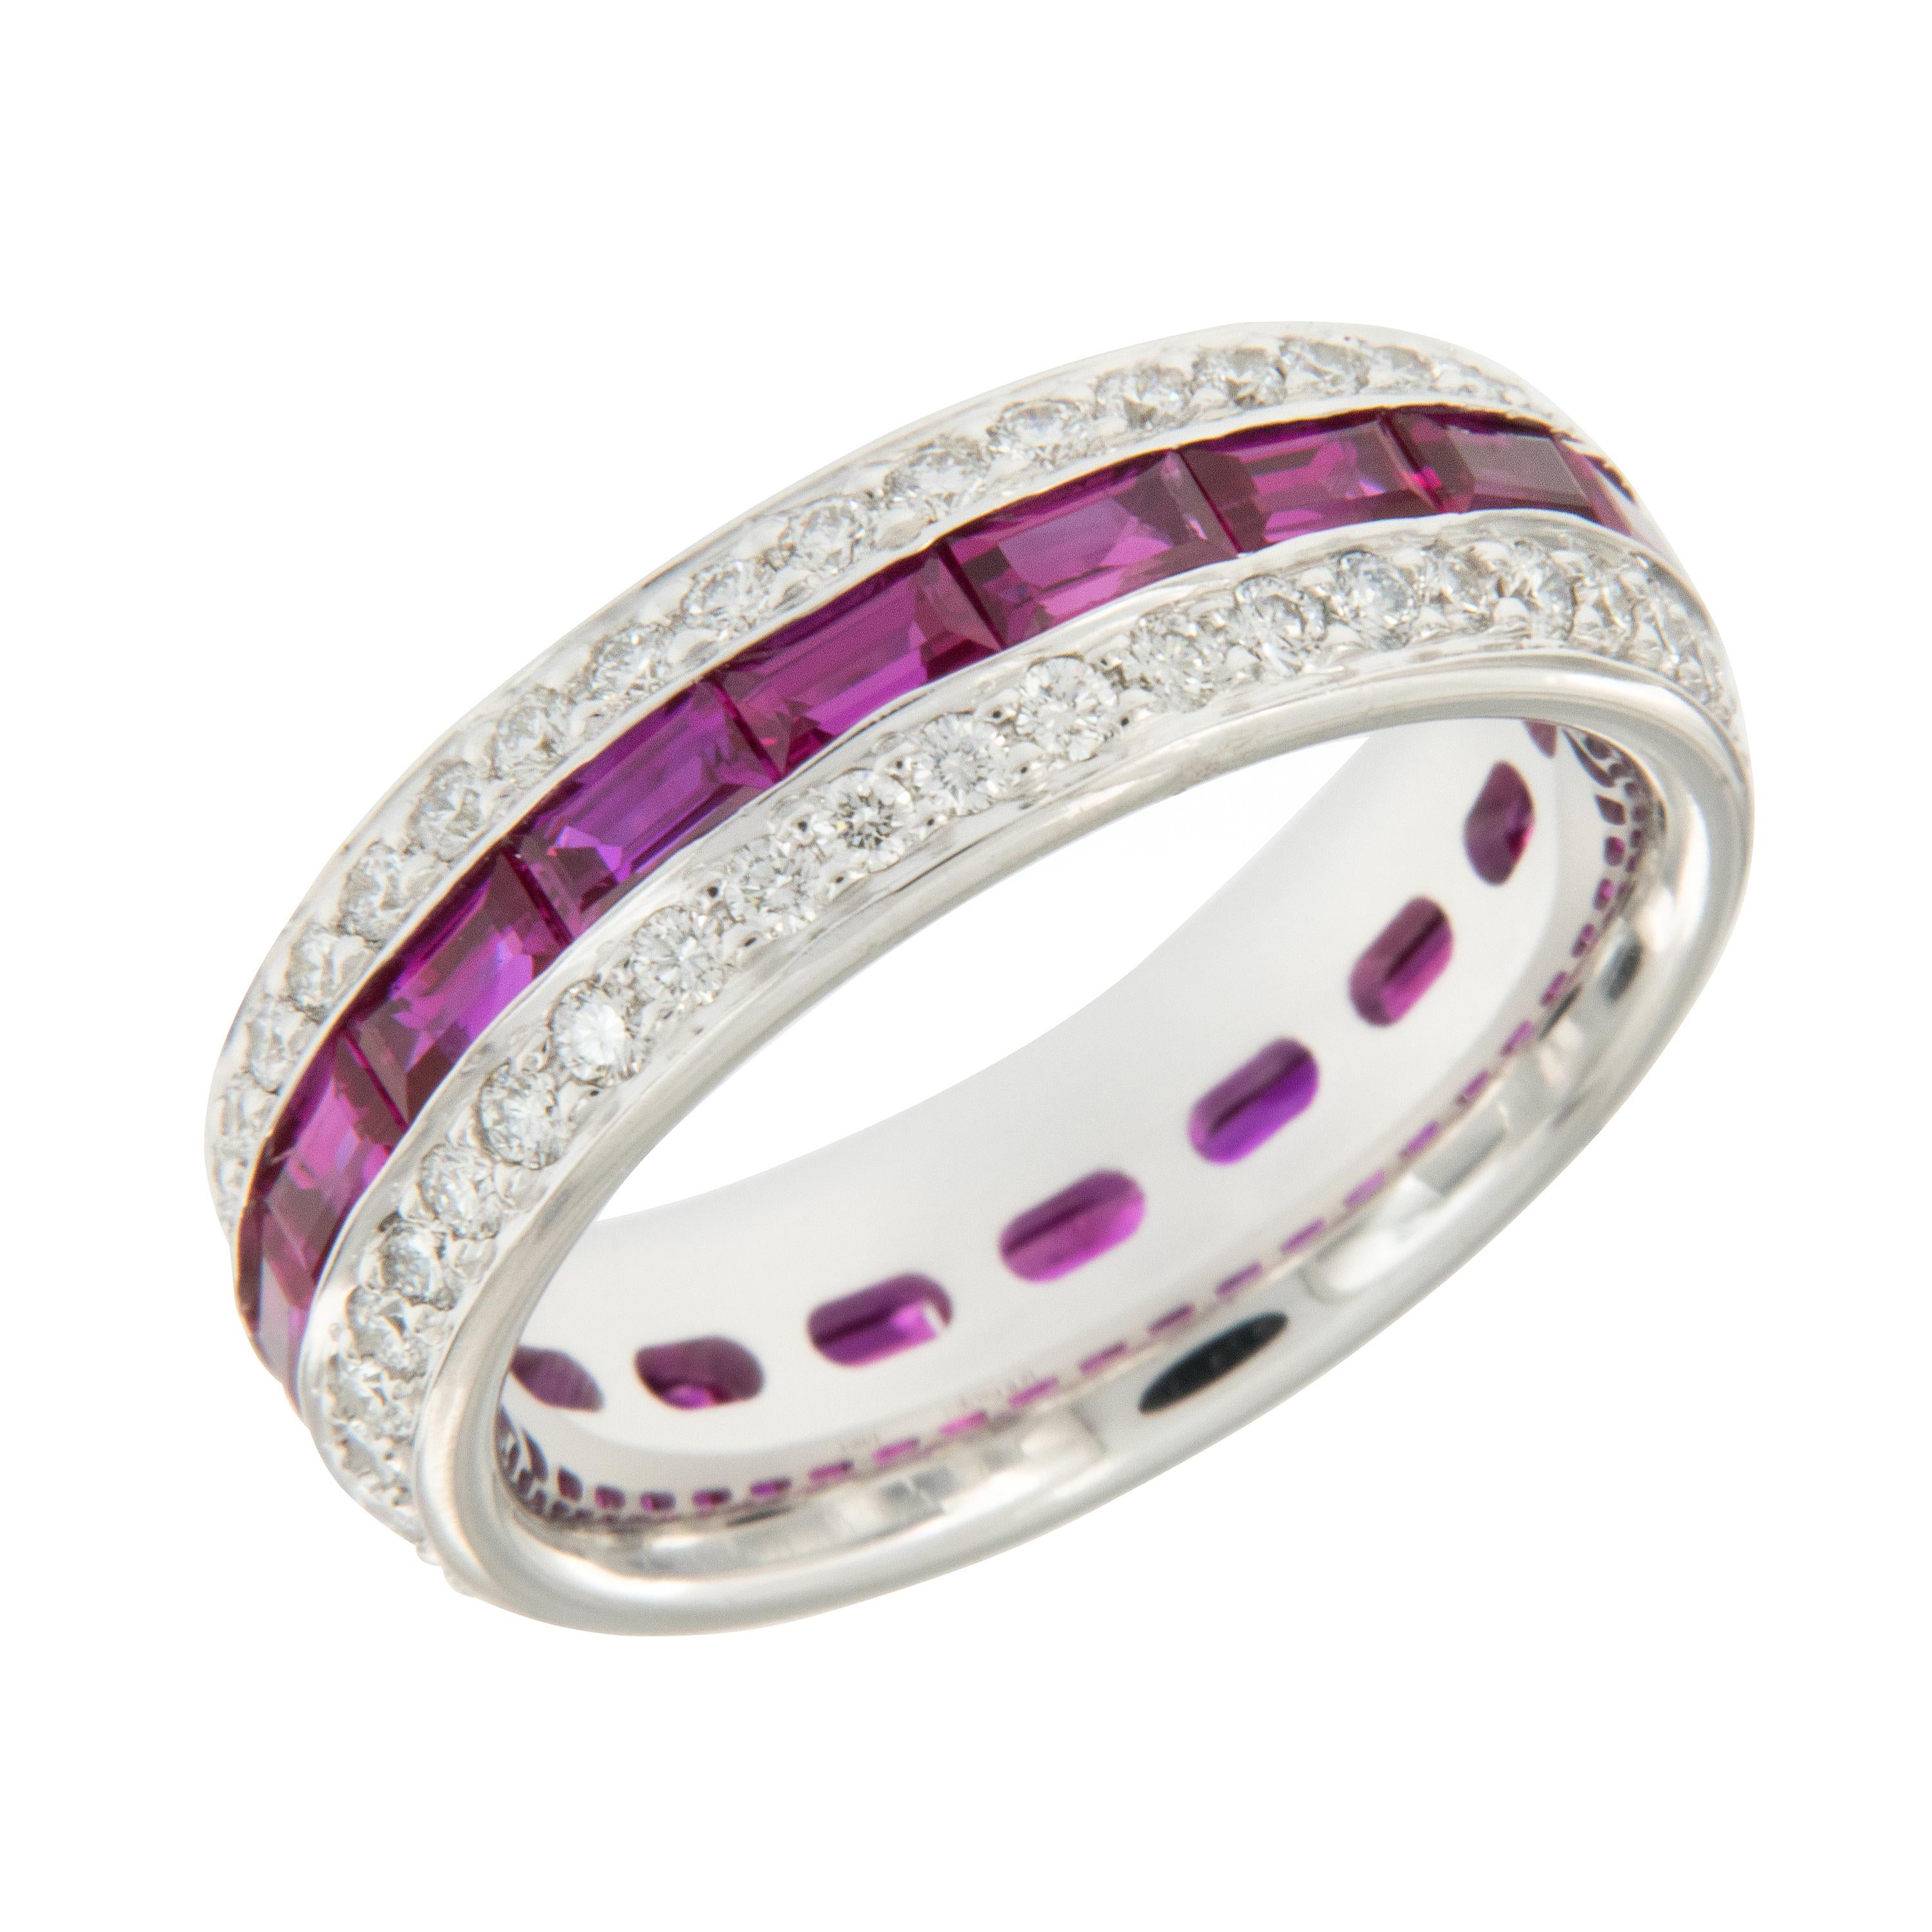 Expertly hand fabricated eternity band by William Rosenberg made from fine 18 karat white gold with horizontally placed, perfectly channel set rubies set off & edged by pave' set diamonds . This ring was made in a size 6.25 but can be custom made in